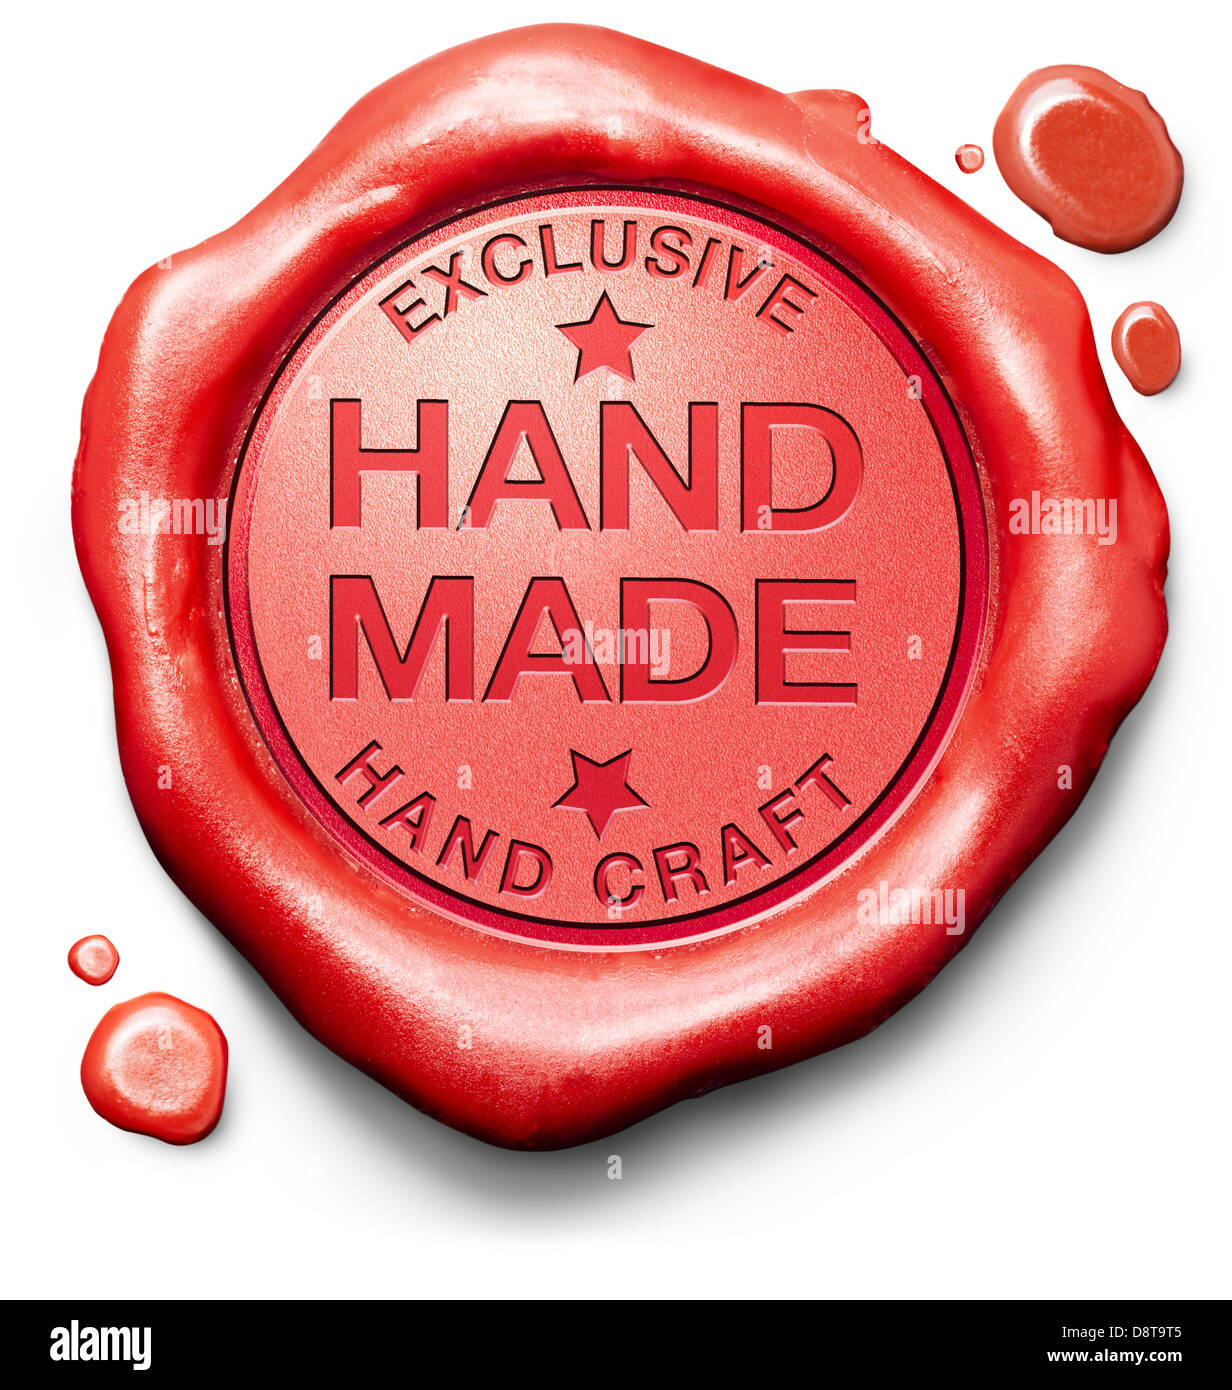 hand made exclusive handmade hand craft custom crafted authentic one of a kind art work red stamp label or icon Stock Photo